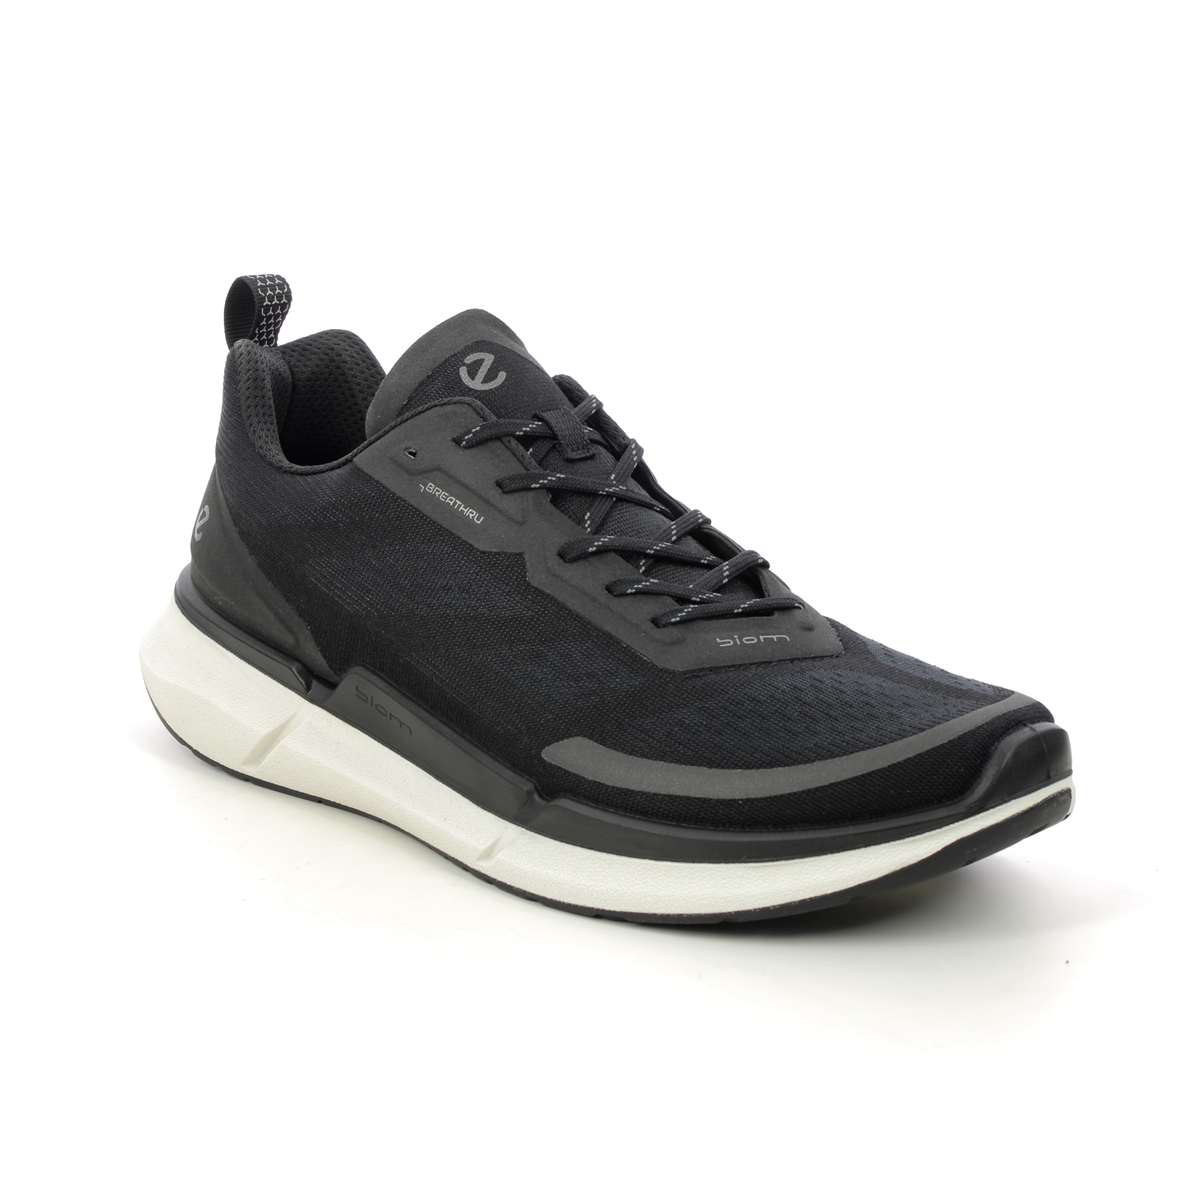 ECCO Biom 2.2 Mens Black White Mens trainers 830754-00001 in a Plain Man-made in Size 43